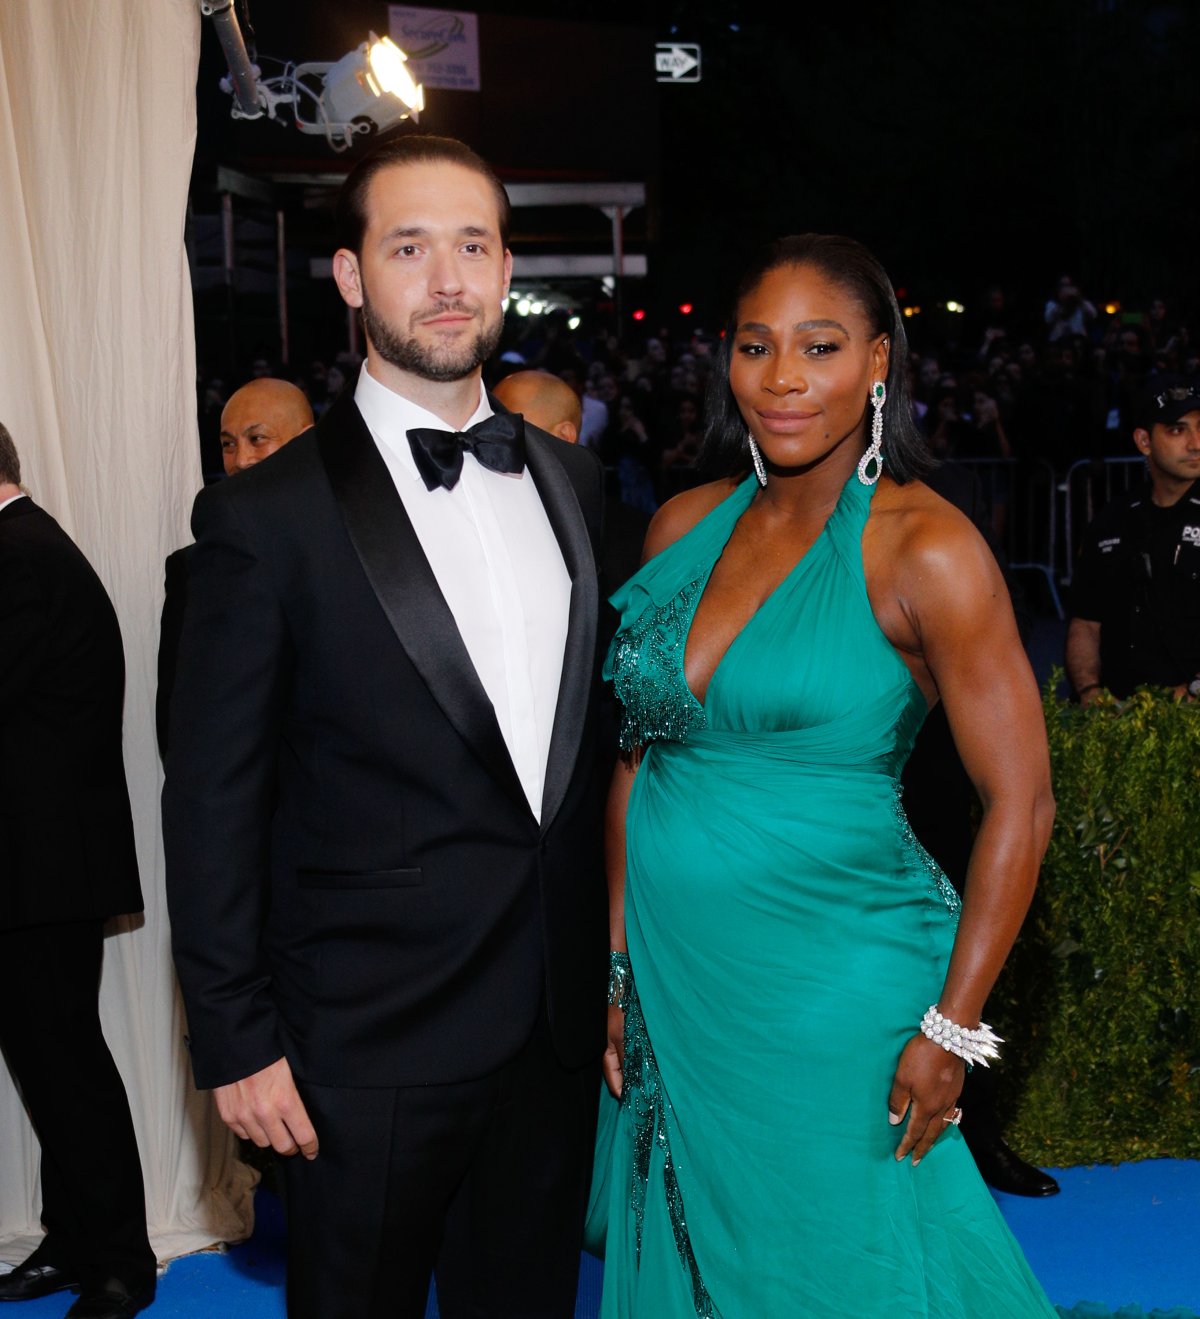 NEW YORK, NY - MAY 01:  Alexis Ohanian and Serena Williams at 'Rei Kawakubo/Comme des Garçons:Art of the In-Between' Costume Institute Gala at Metropolitan Museum of Art on May 1, 2017 in New York City.